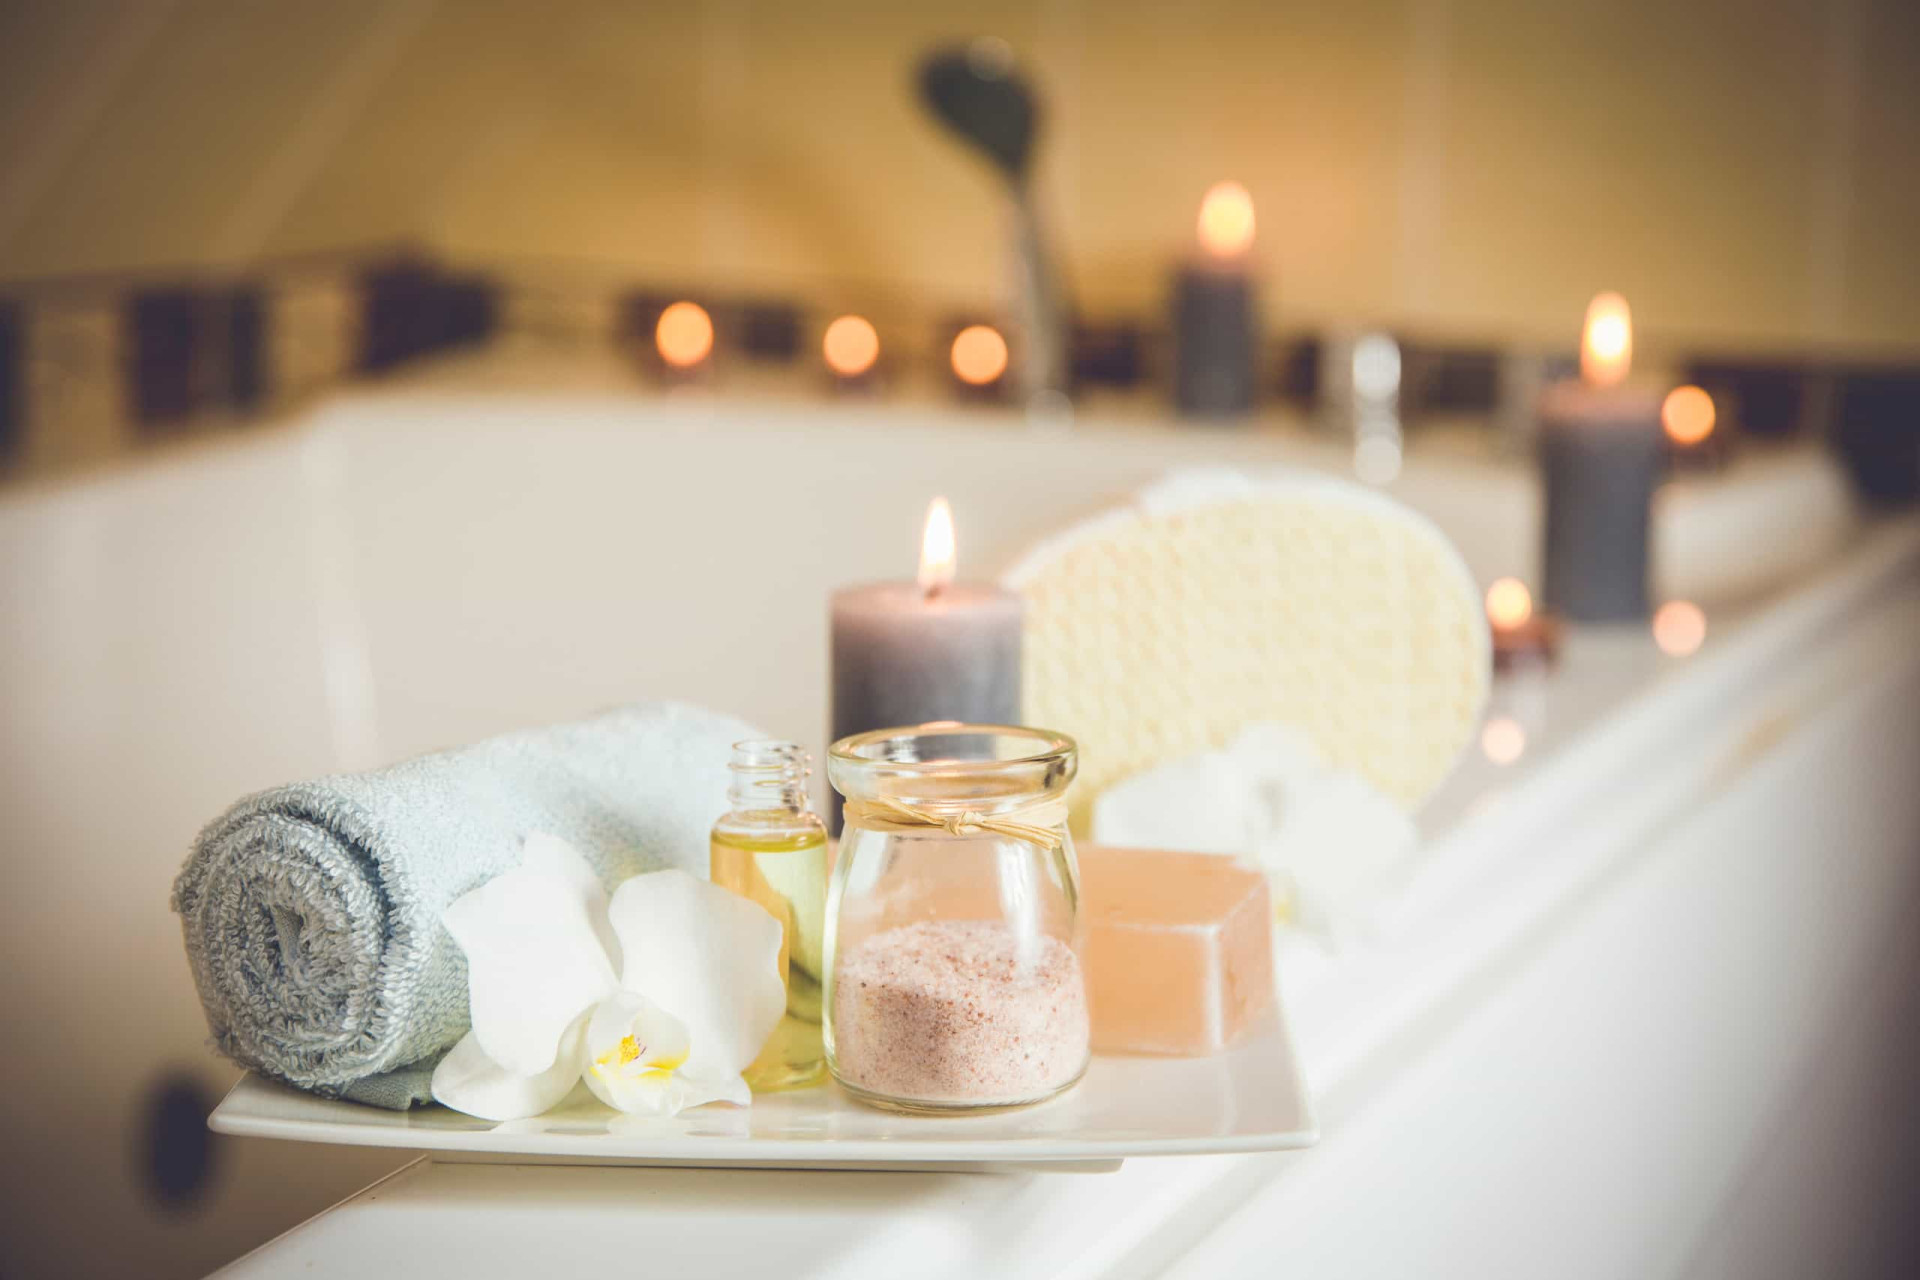 <p><span>While you’re filling the tub, dim the lights (or turn them off completely if necessary) and light some candles. Pour yourself a glass or cup of your favorite drink. </span></p><p>You may also like:<a href="https://www.starsinsider.com/n/174379?utm_source=msn.com&utm_medium=display&utm_campaign=referral_description&utm_content=494861en-en"> Facts you couldn't have imagined about Thomas Edison</a></p>